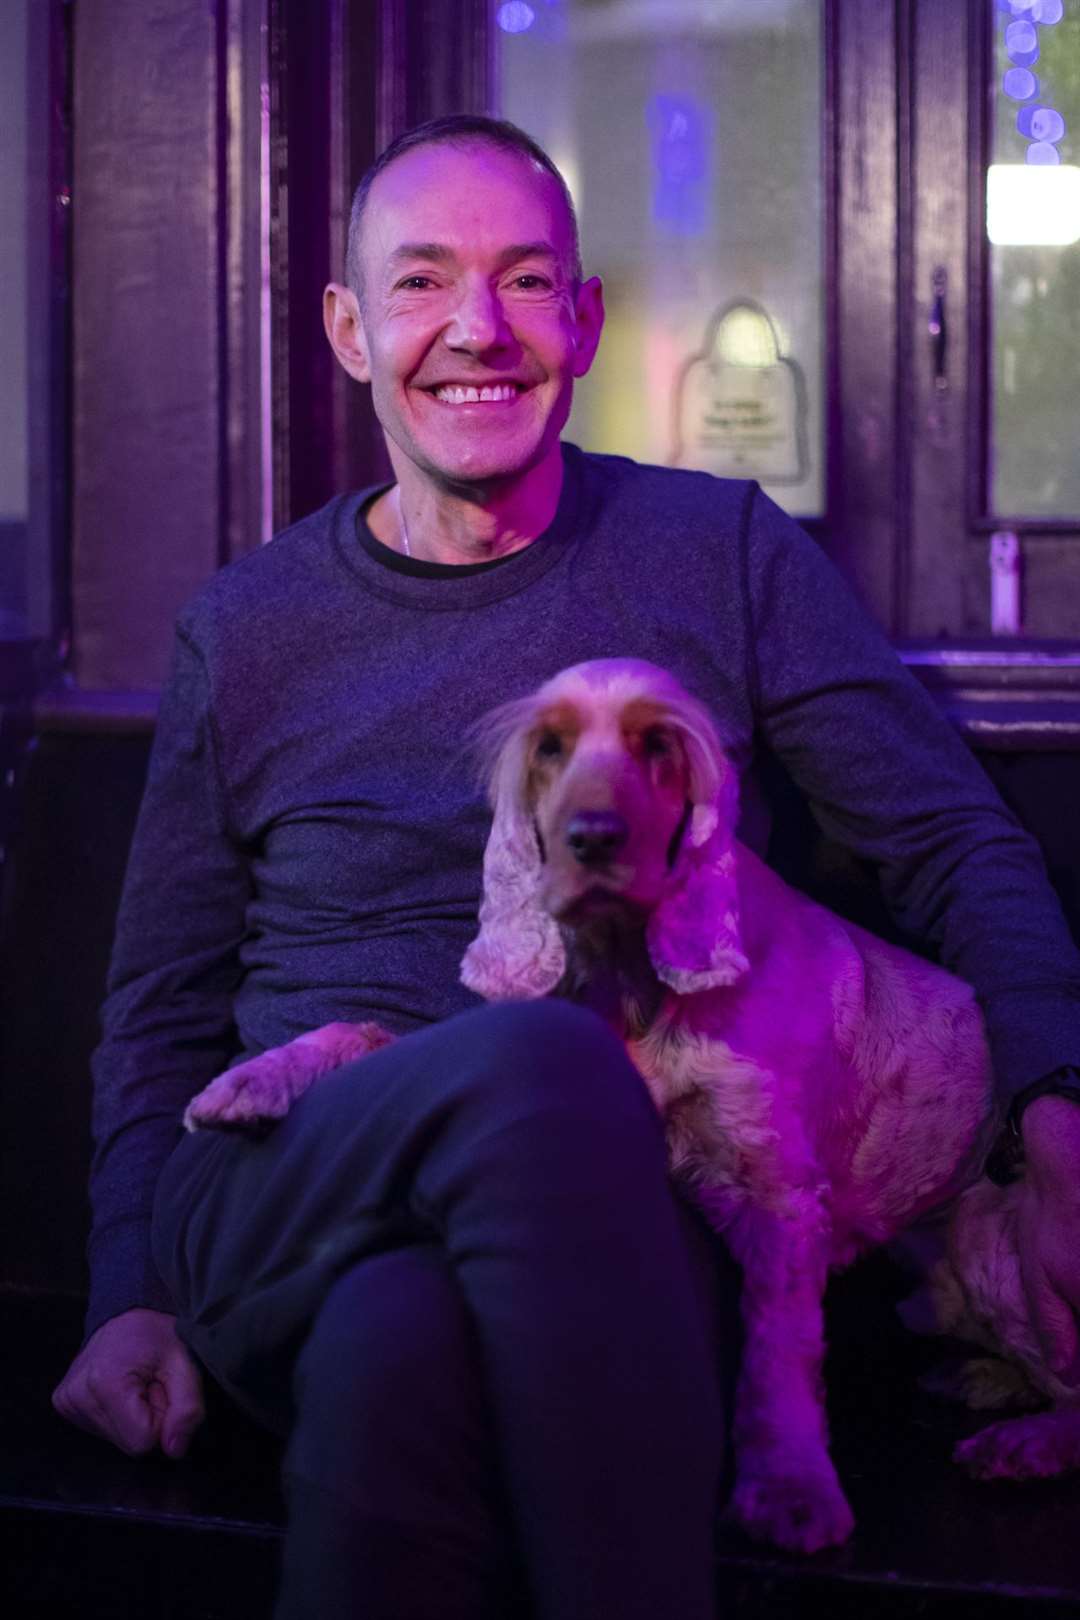 Owner Jeremy Joseph, with his dog Jacob, at G-A-Y bar in Soho, London (PA)